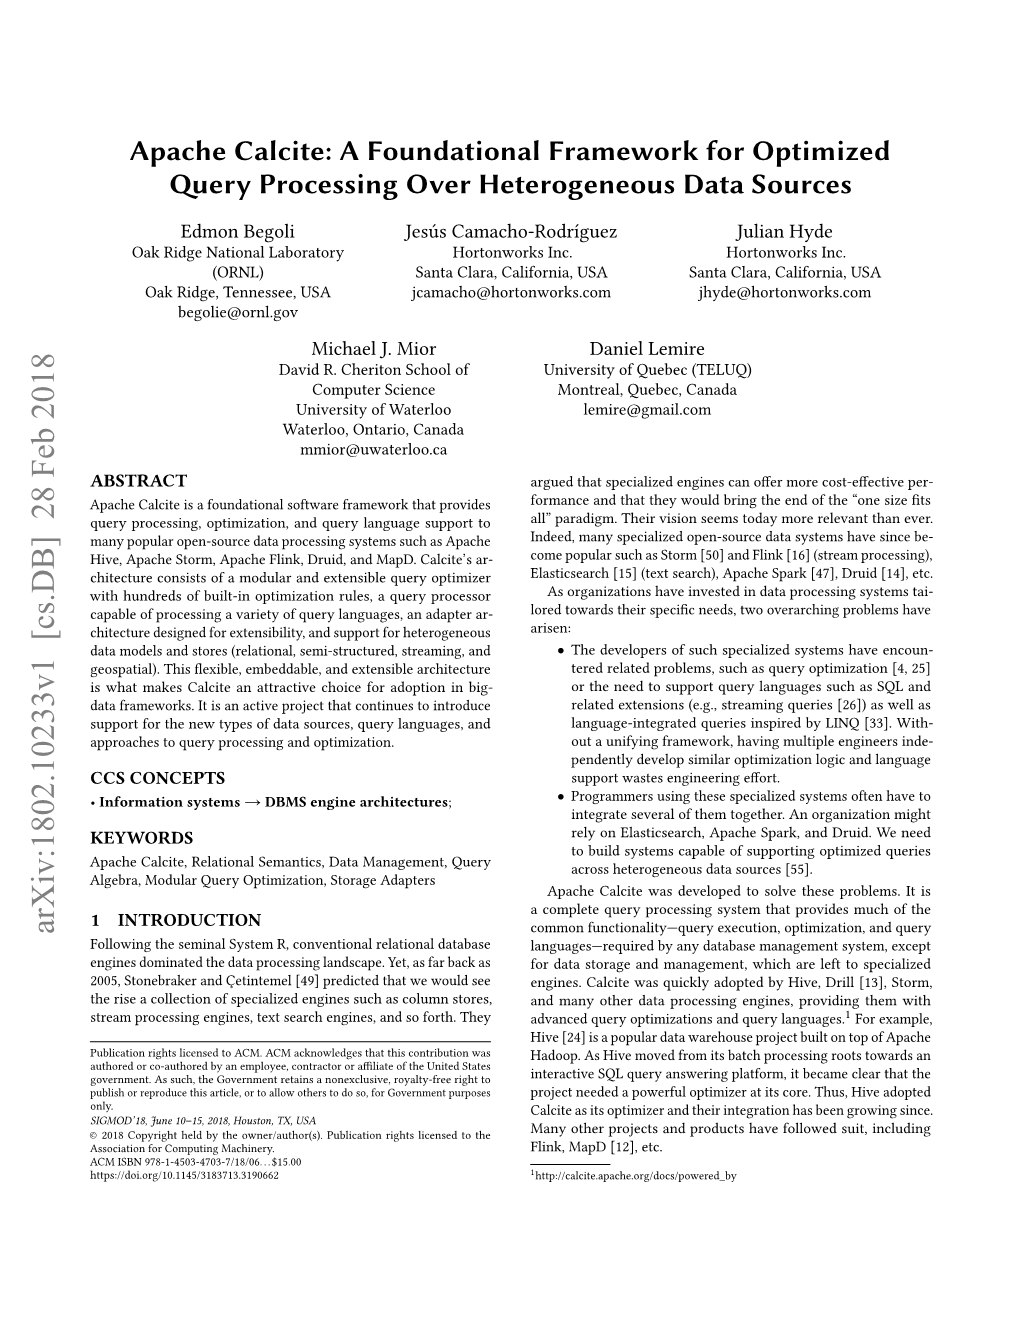 Apache Calcite: a Foundational Framework for Optimized Query Processing Over Heterogeneous Data Sources